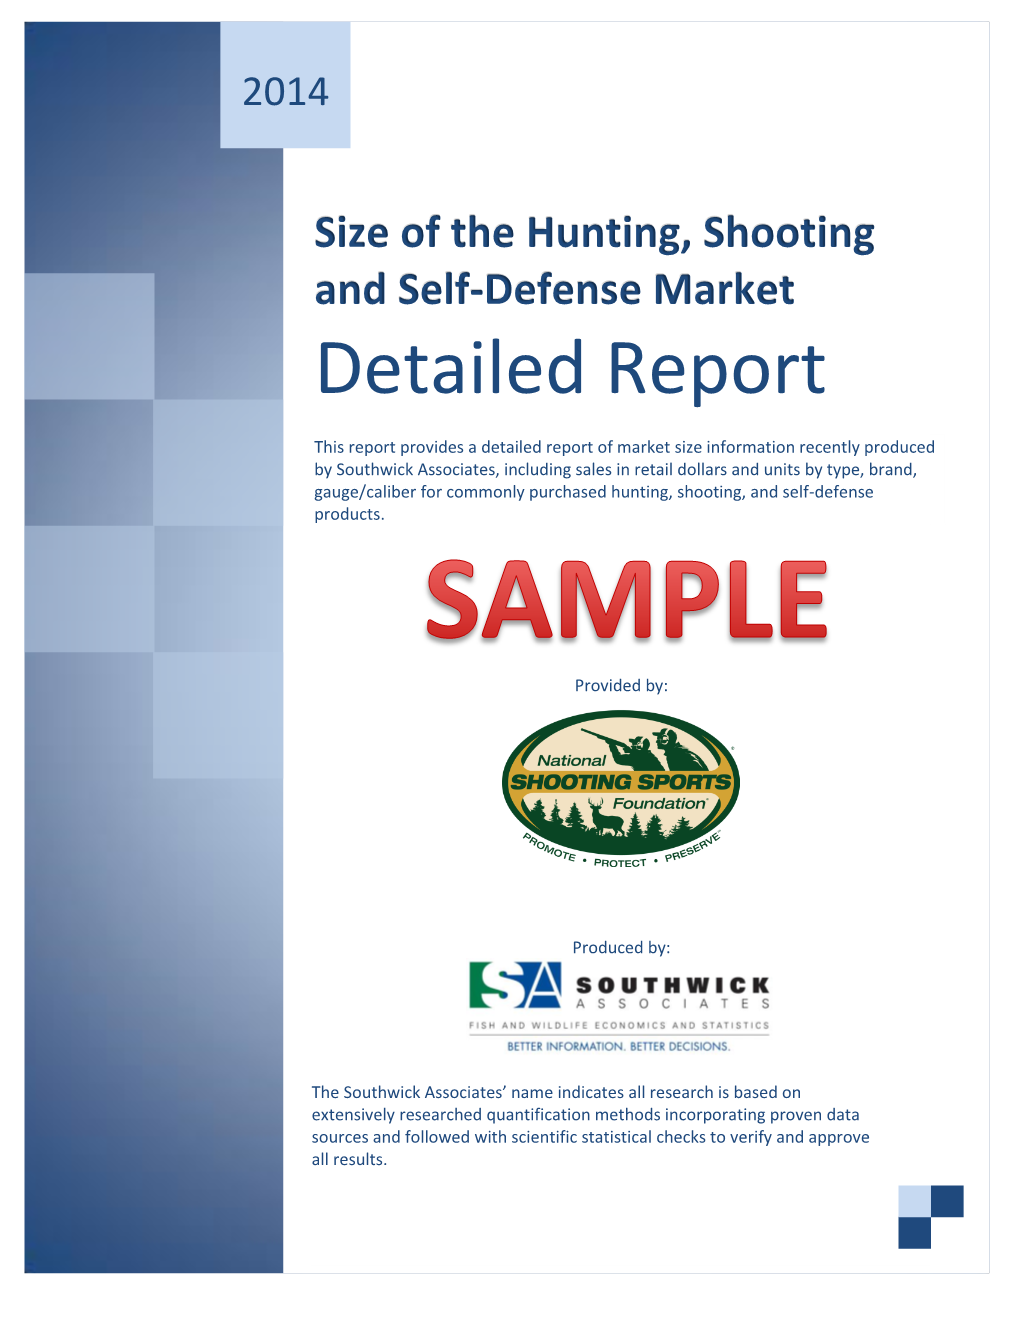 Size of the Hunting, Shooting and Self-Defense Market Detailed Report